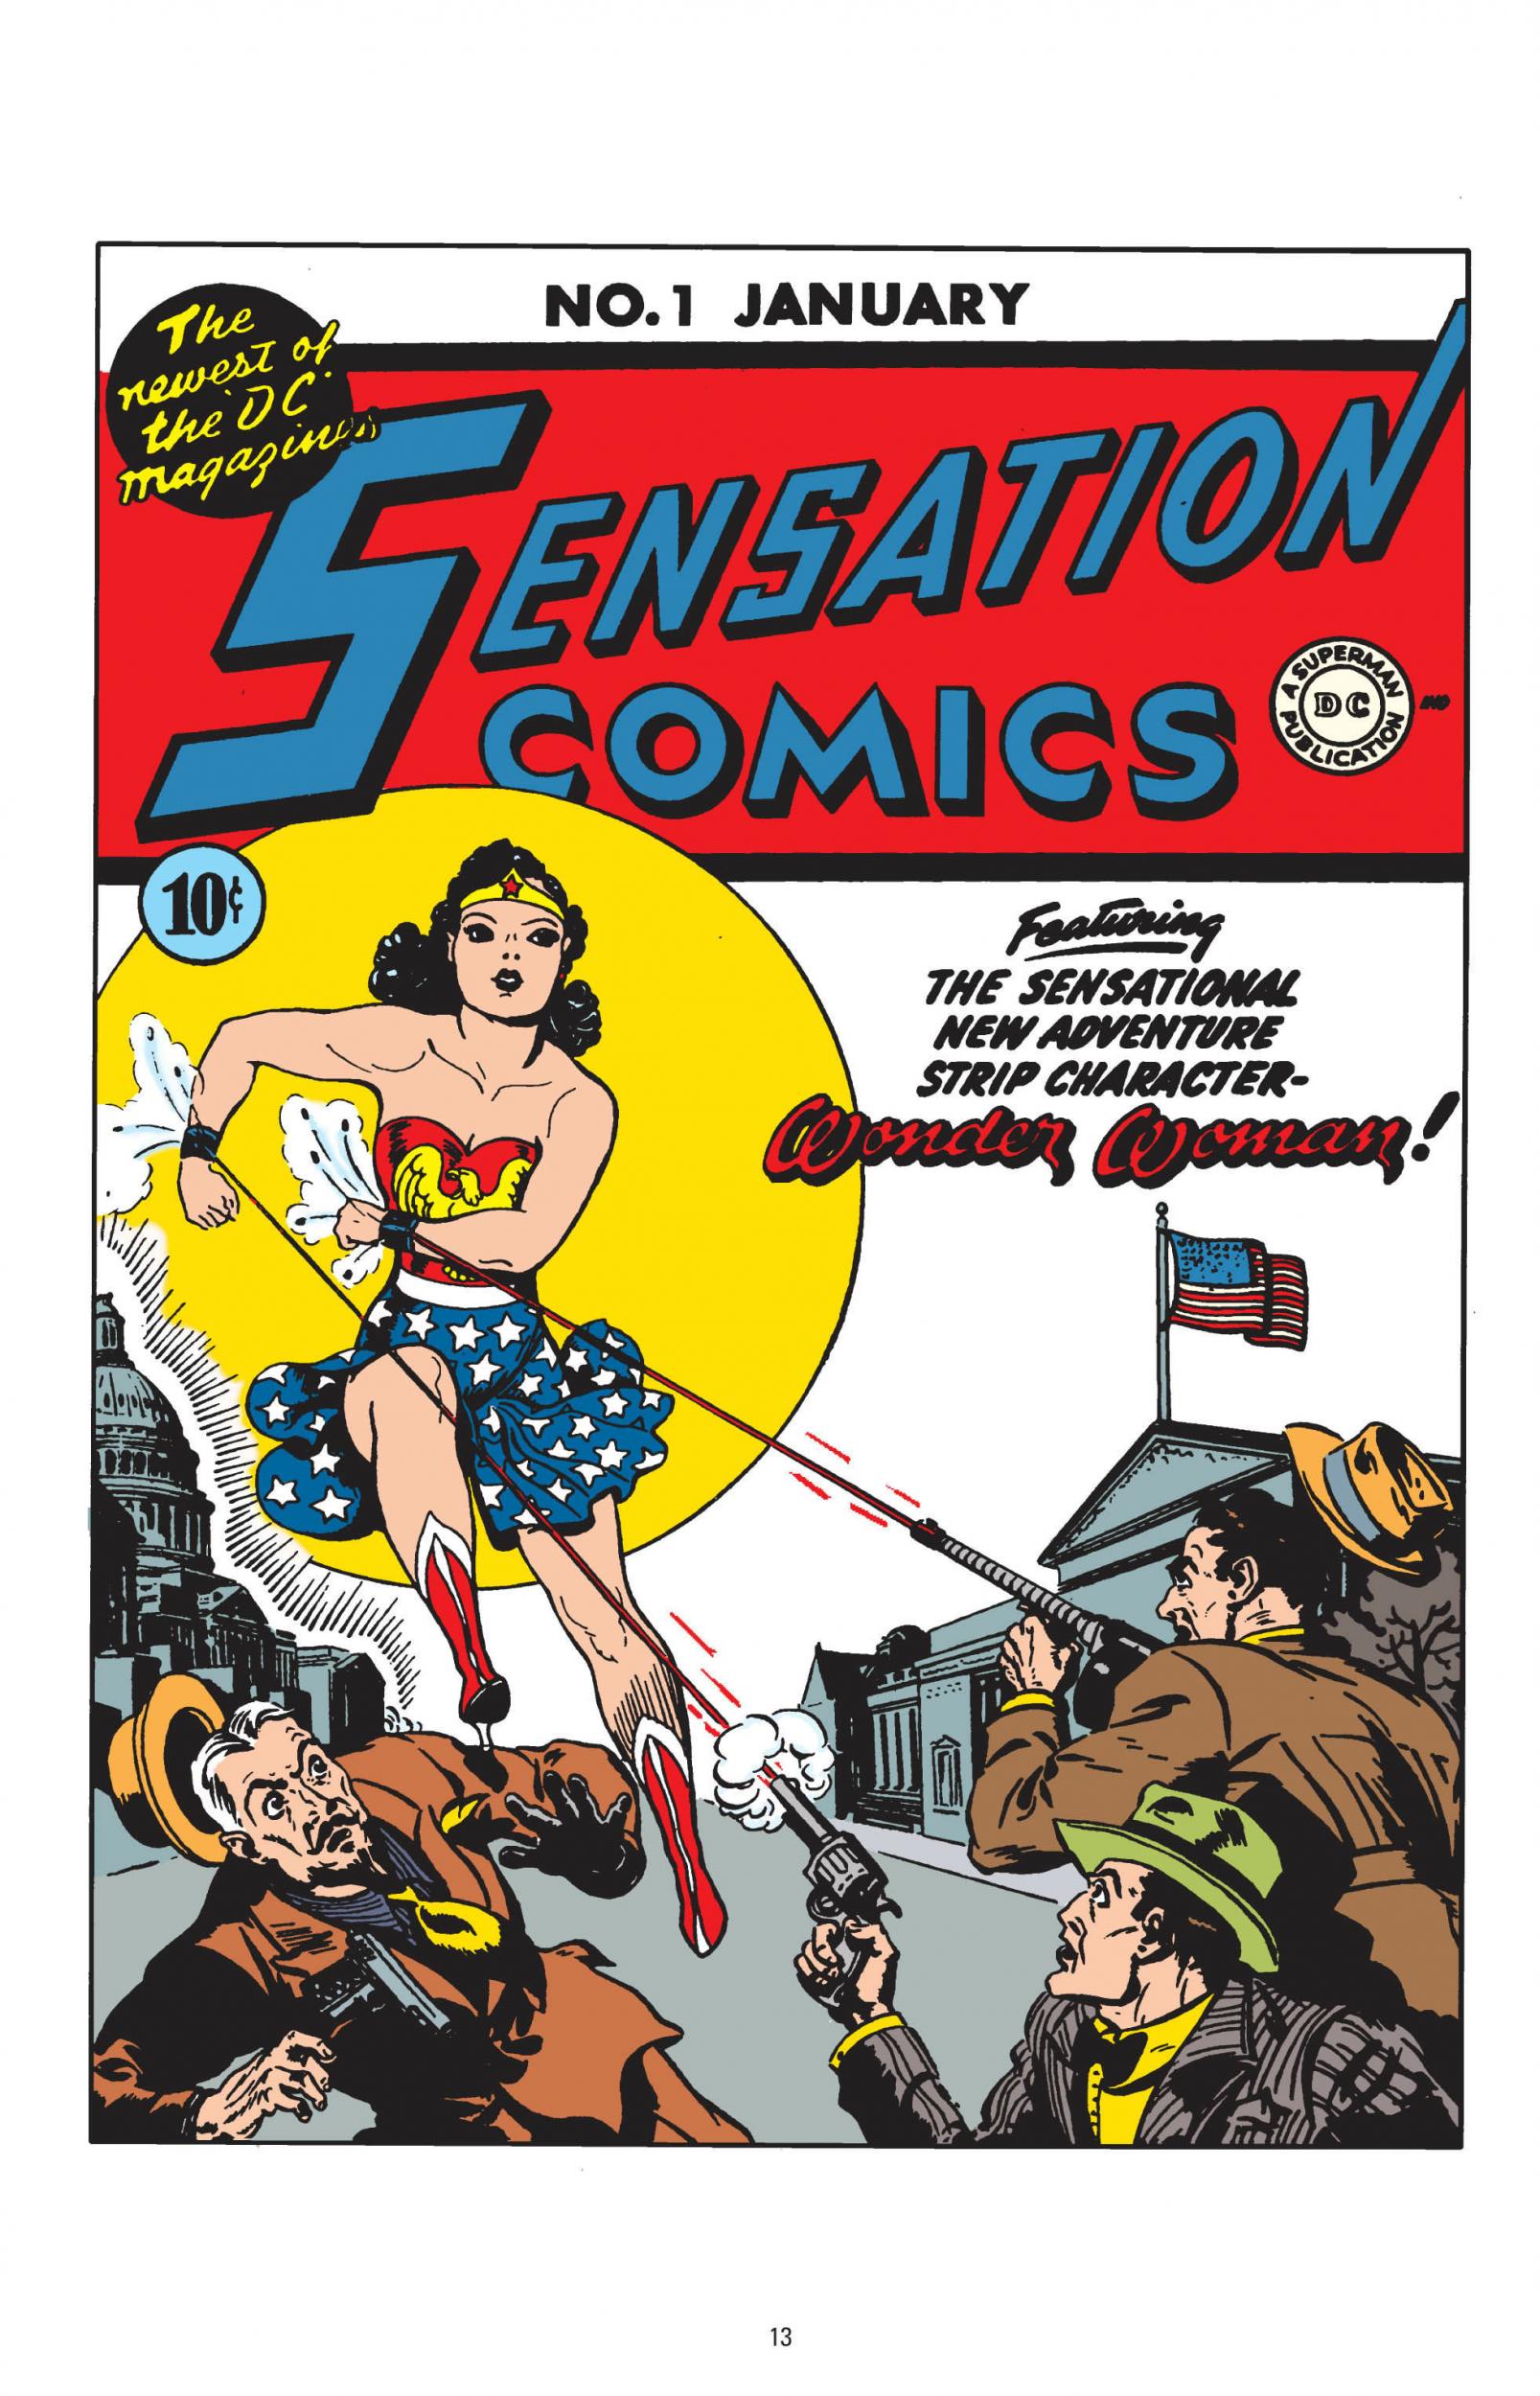 A Look Back At Wonder Woman's Feminist And Not So Feminist